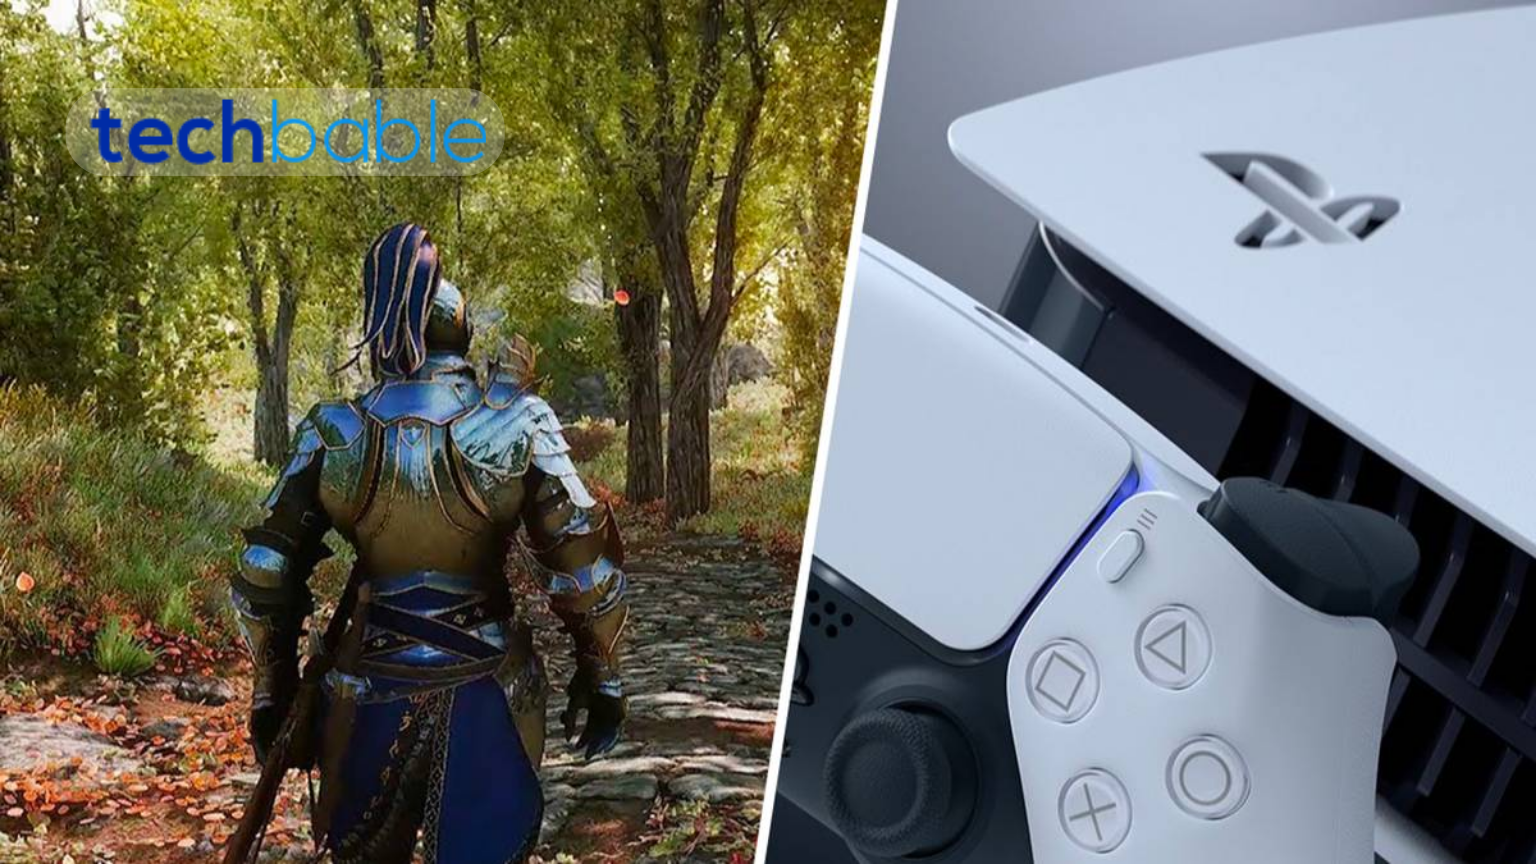 Will the Elder Scrolls 6 be on PS5?